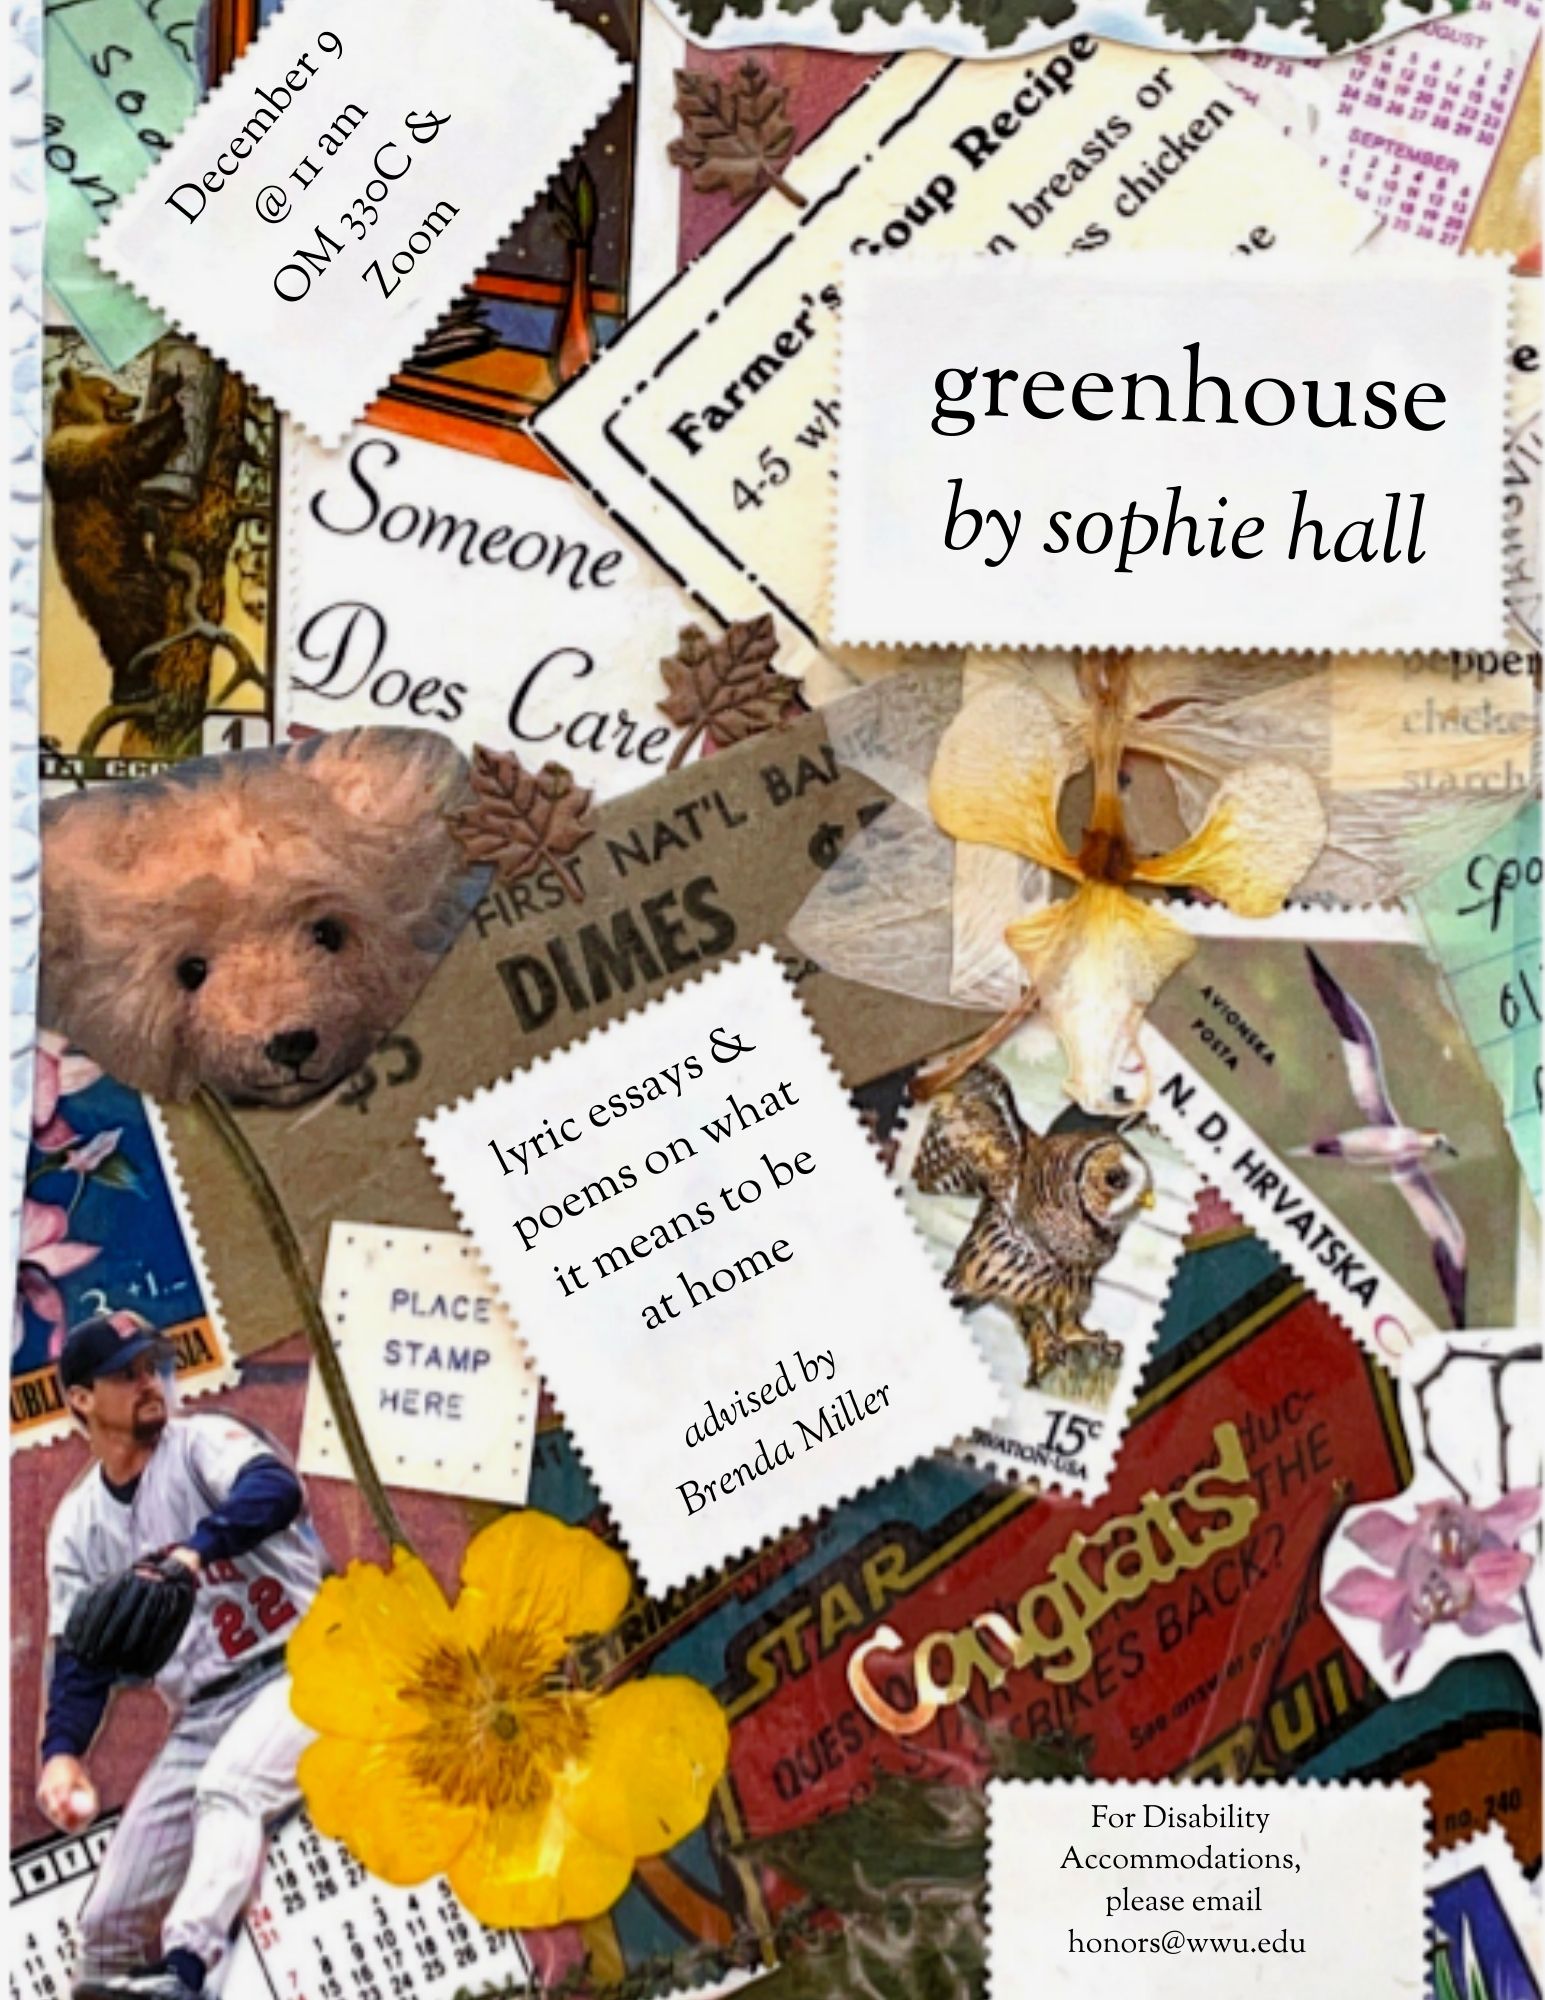 On a collage background, text is pictured over blank postage stamp shapes, reading, "Greenhouse by Sophie Hall: lyric essays and poems on what it means to be at home. Advised by Brenda Miller. December 9, 2021 at 11 am. For disability accommodations, please email honors@wwu.edu." The collage background includes a stamp with a bear climbing a tree on it, a stamp with an owl on it, a pressed buttercup, a pressed orchid, a teddy bear head, a baseball player, a few scattered maple leaves, and more."